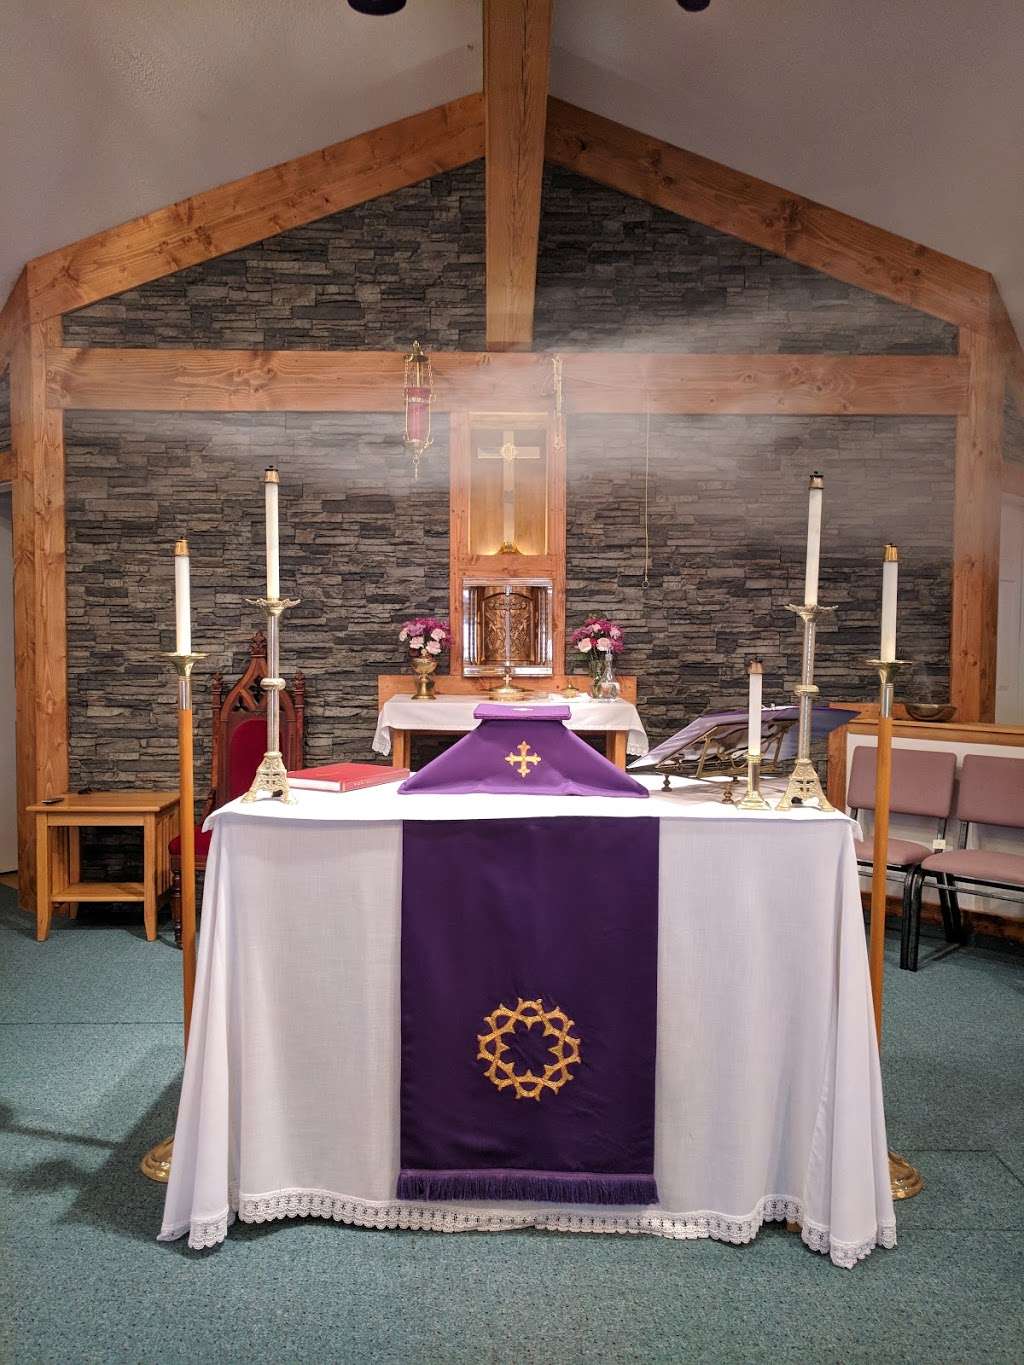 Holy Trinity Charismatic Episcopal Church | 4728 Plank Rd, New Freedom, PA 17349 | Phone: (717) 235-1555